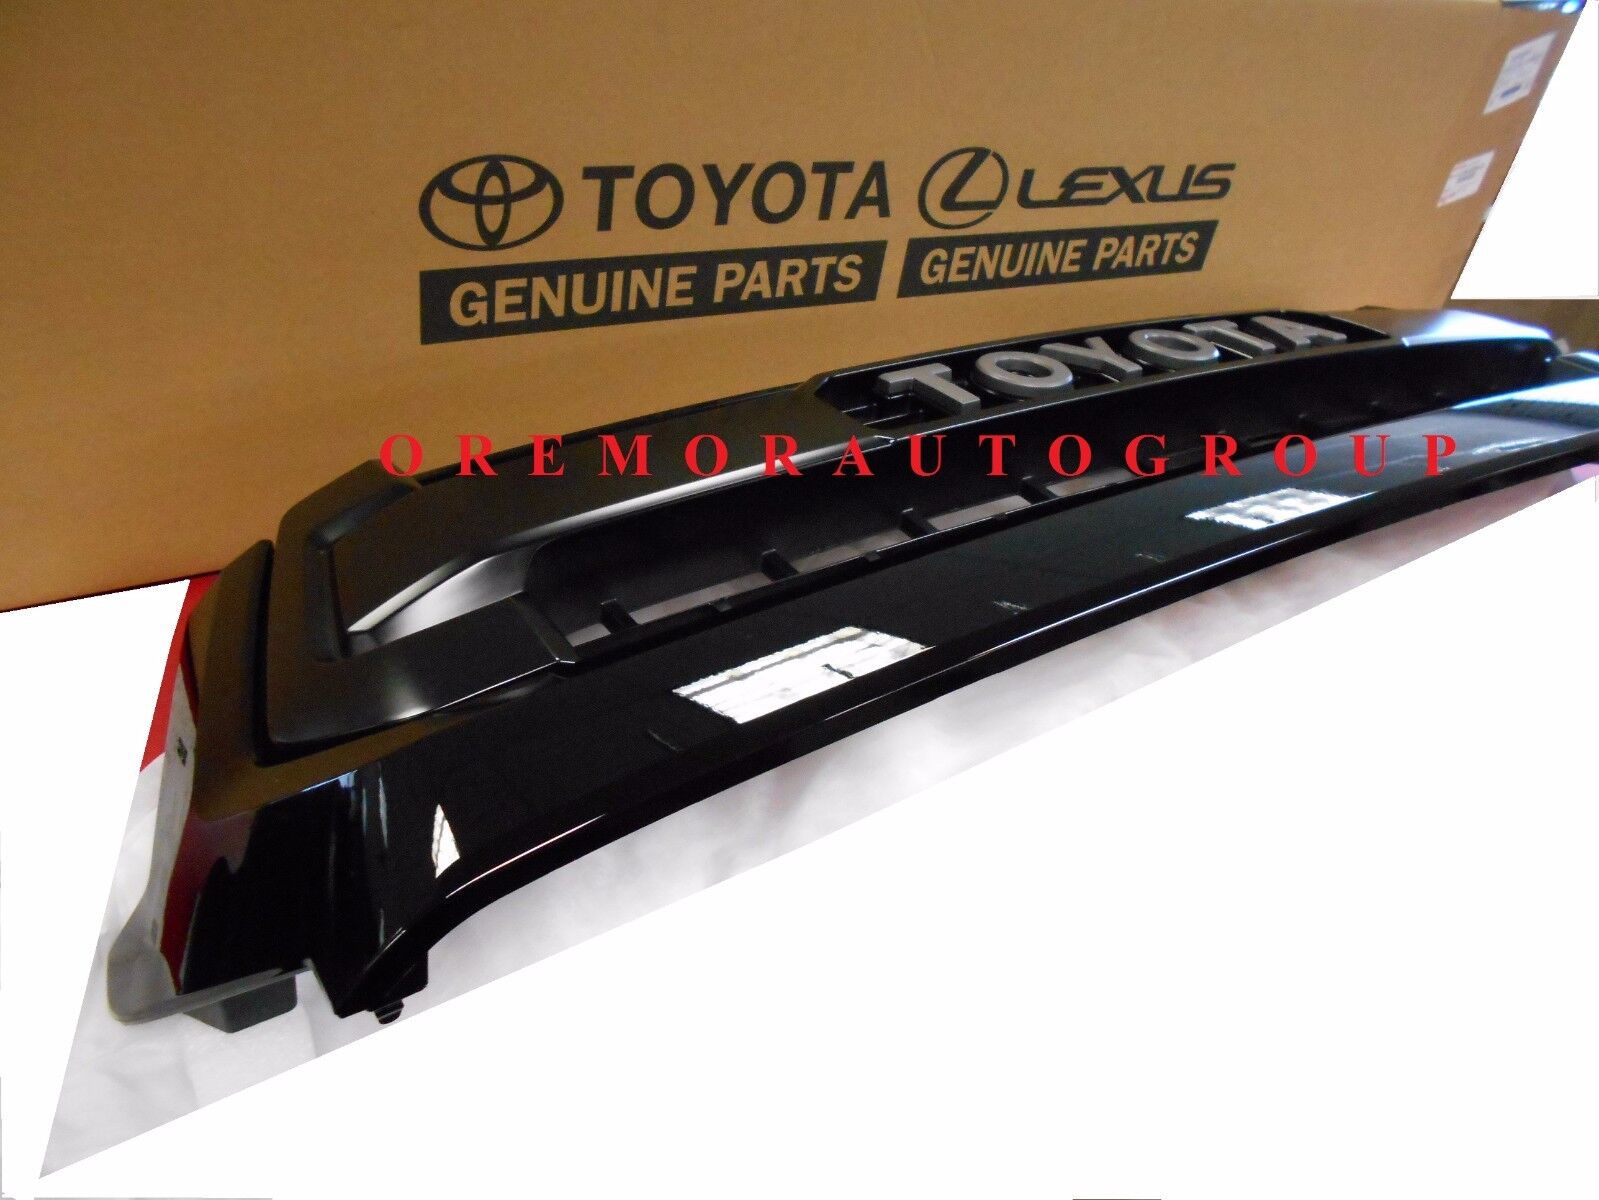 2014-2017 Genuine Toyota Tundra TRD Pro Grille Grill 53100-0C260-C0 OEM NEW